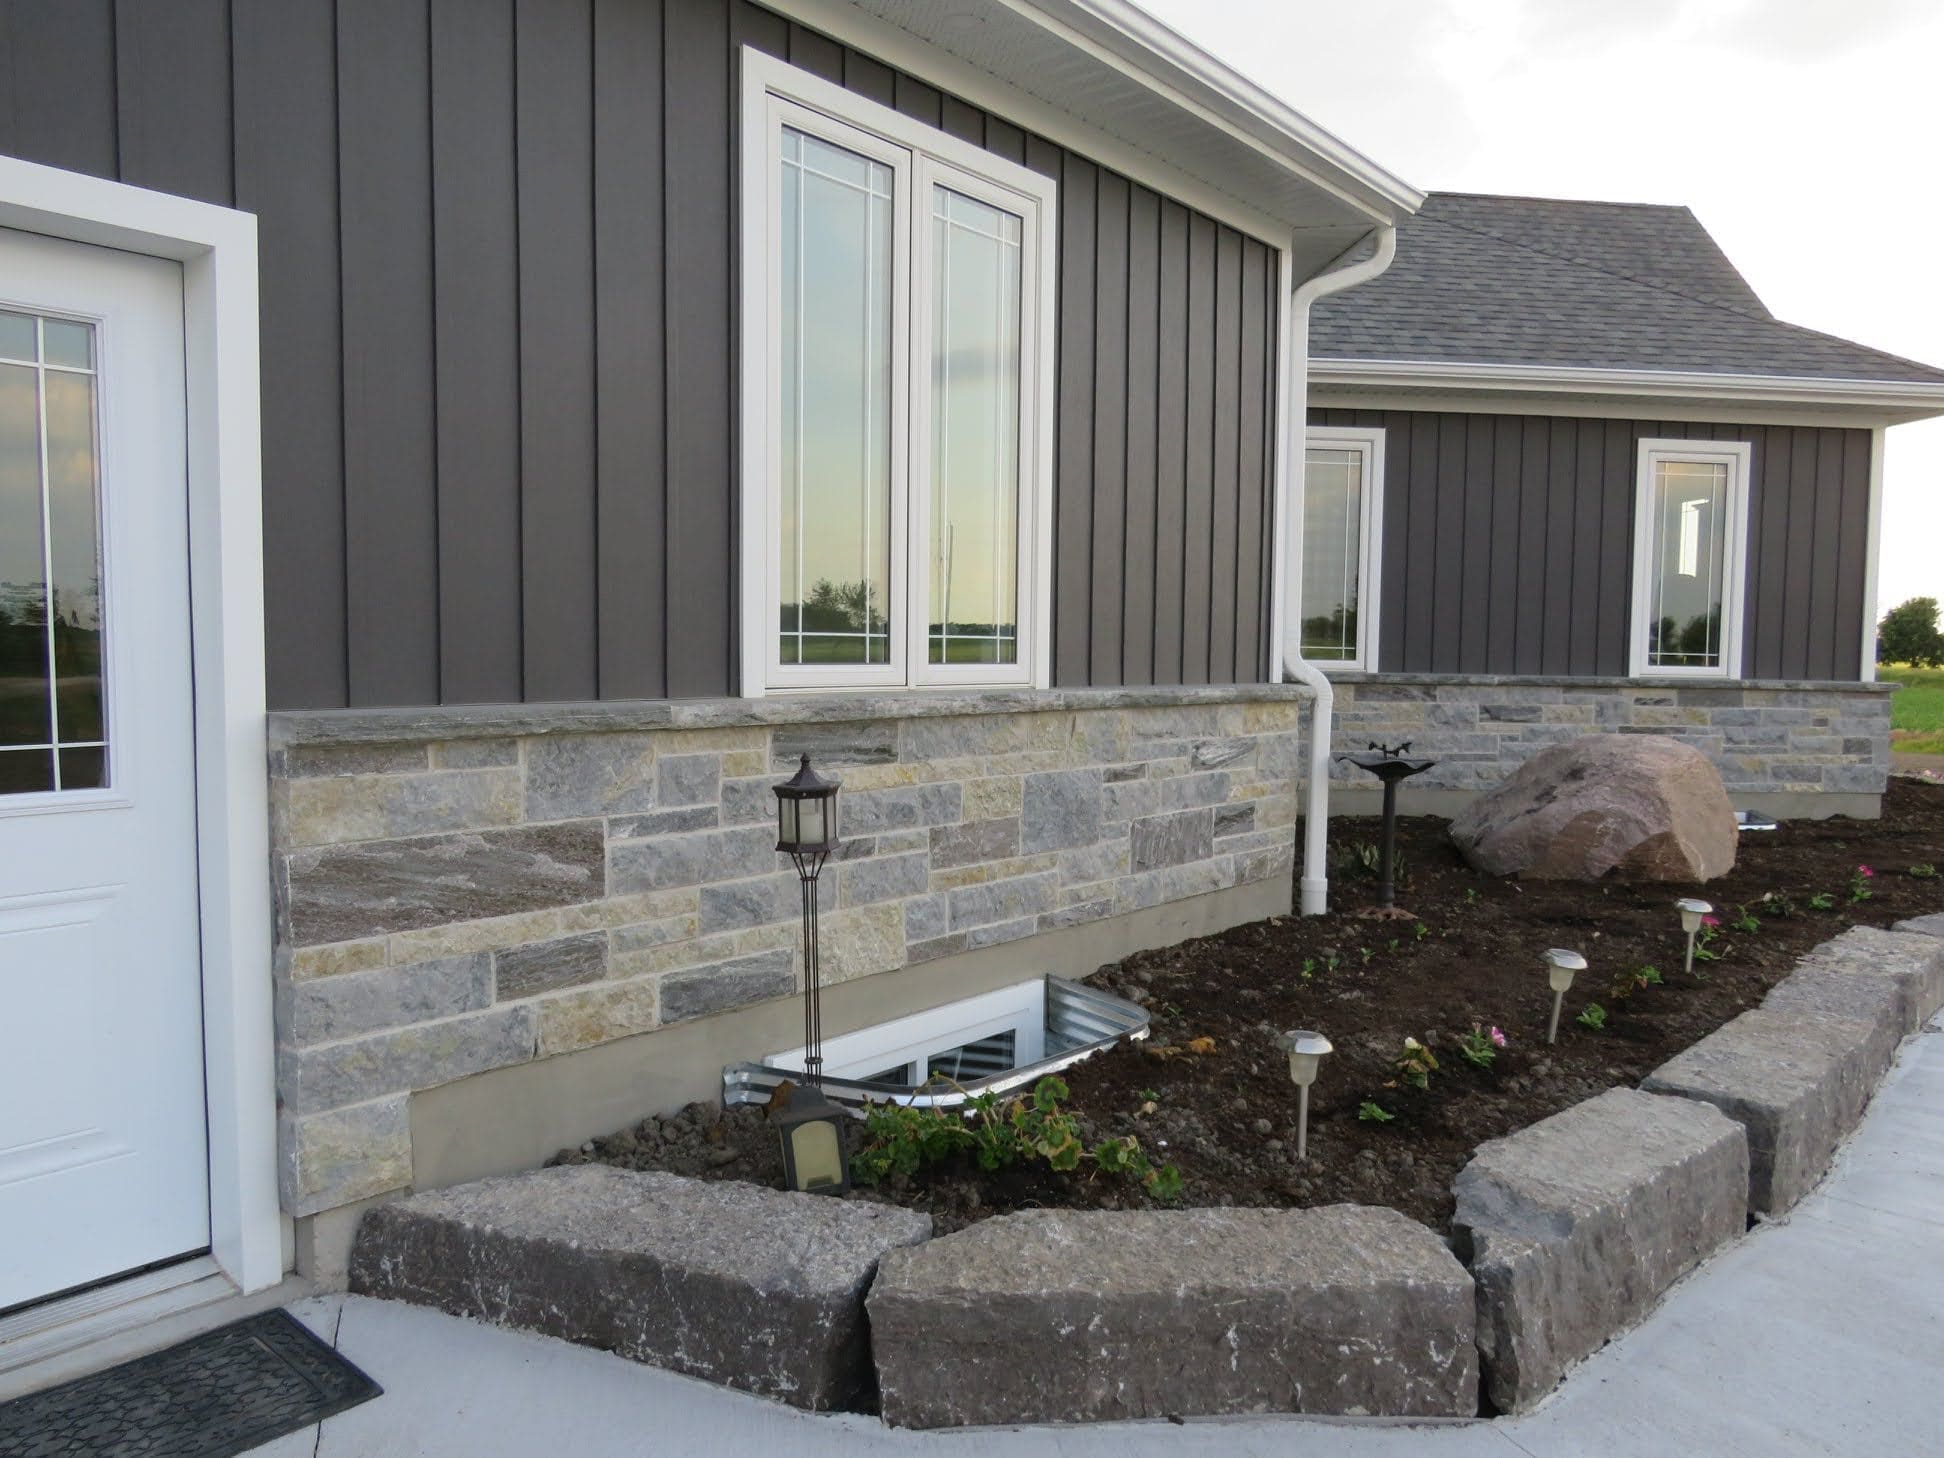 Jacksonport and Pembroke Natural Stone Veneer Blend with White Mortar